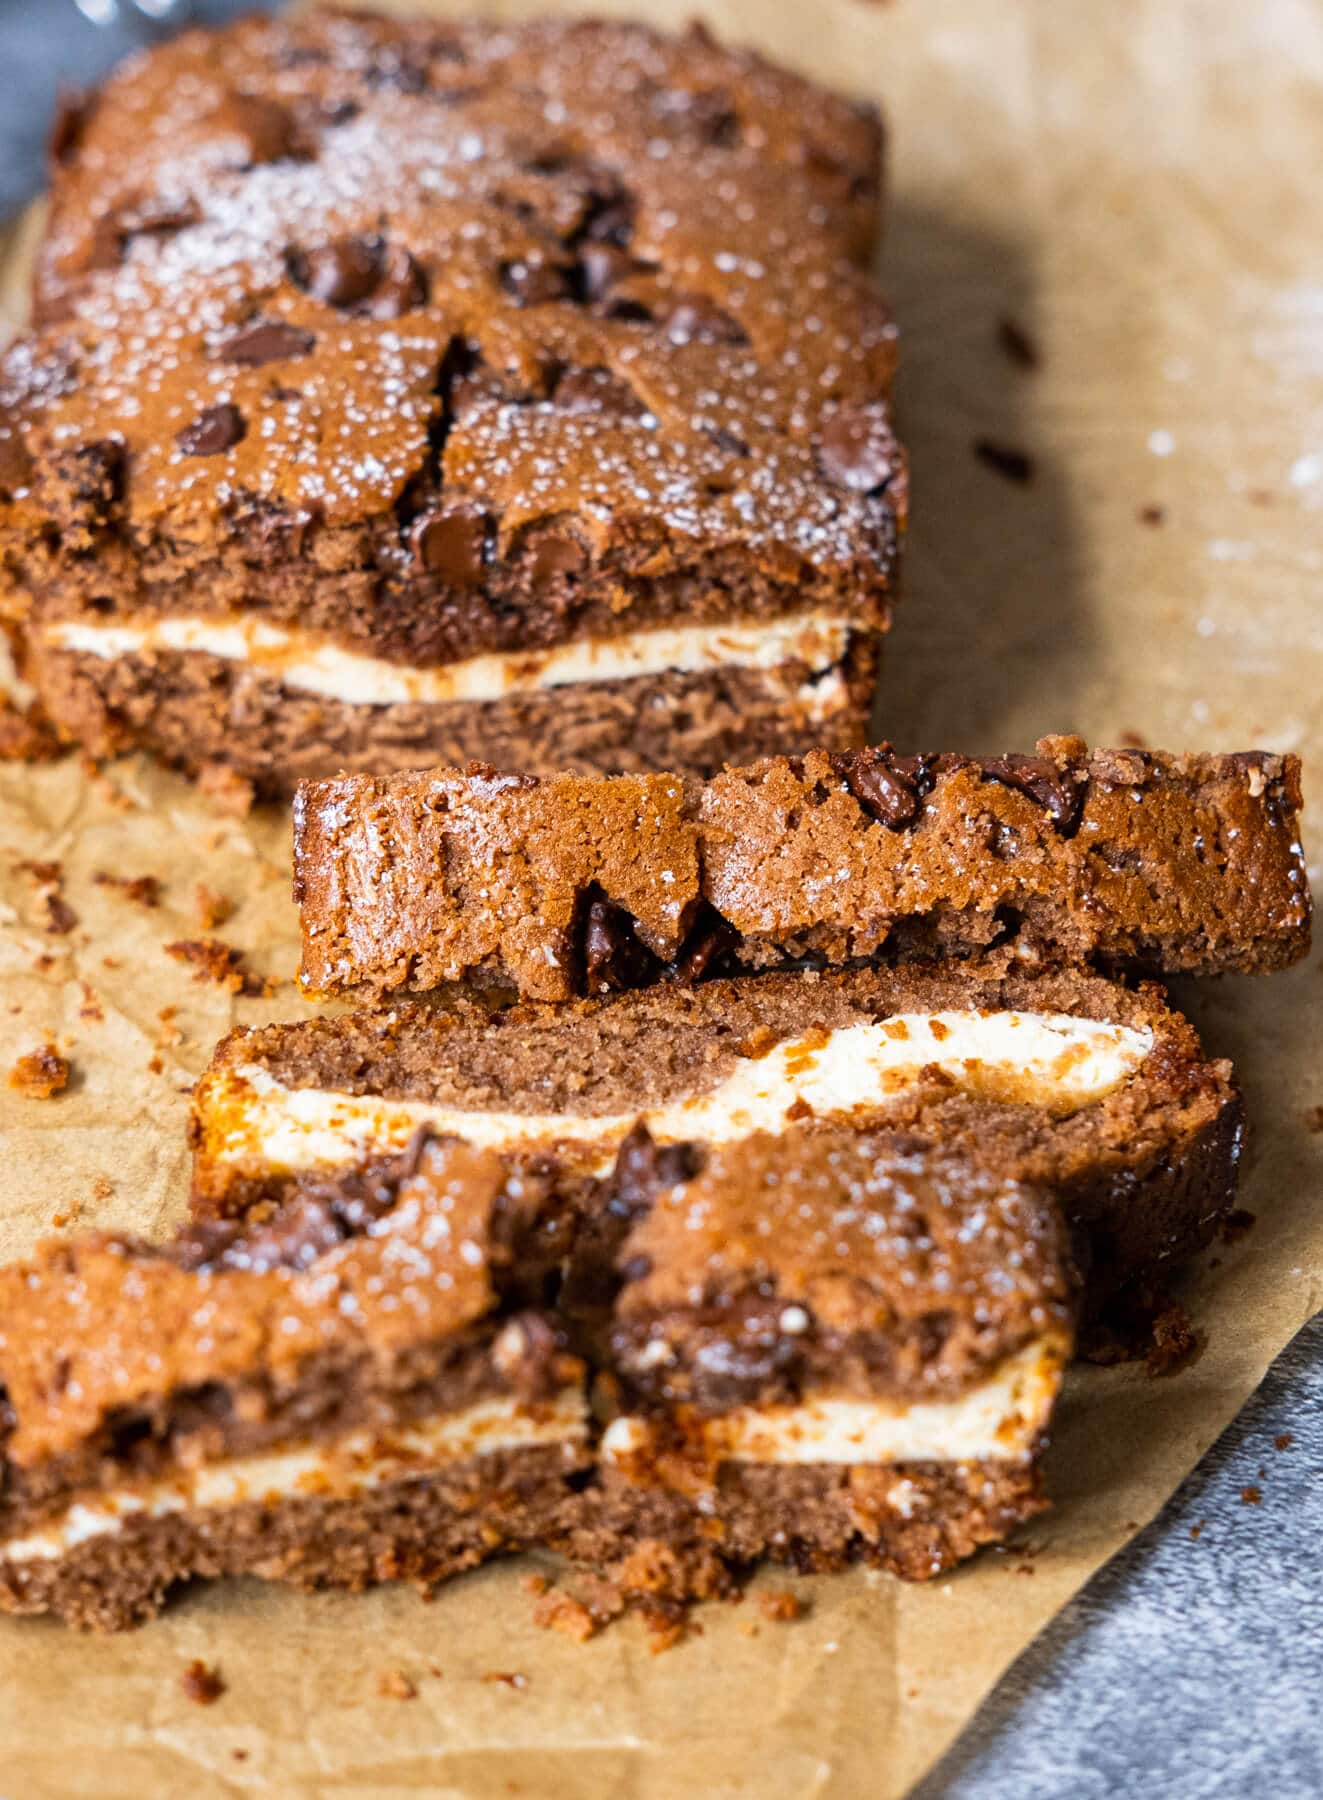 A tempting close-up of a cake, featuring layers of moist chocolate cake generously coated with a velvety cream cheese frosting and beautifully garnished with chocolate curls.